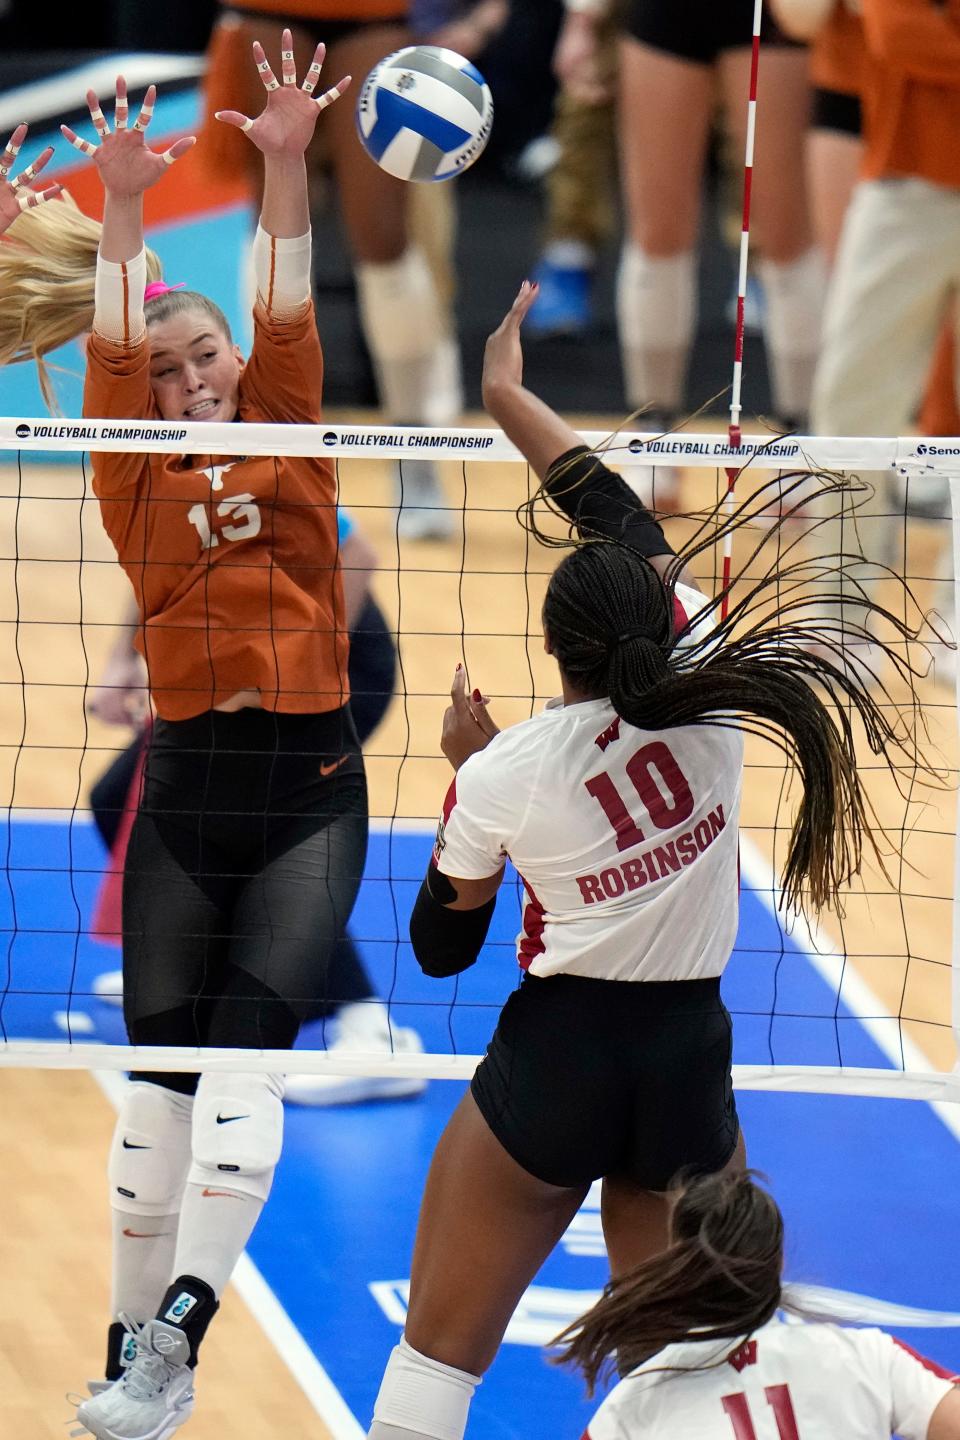 Texas outside hitter Jenna Wenaas, left, blocks a shot by Wisconsin's Devyn Robinson in the 3-1 win over Wisconsin Thursday night in Tampa, Fla. With the win, Texas advances to face Nebraska in Sunday's national championship.